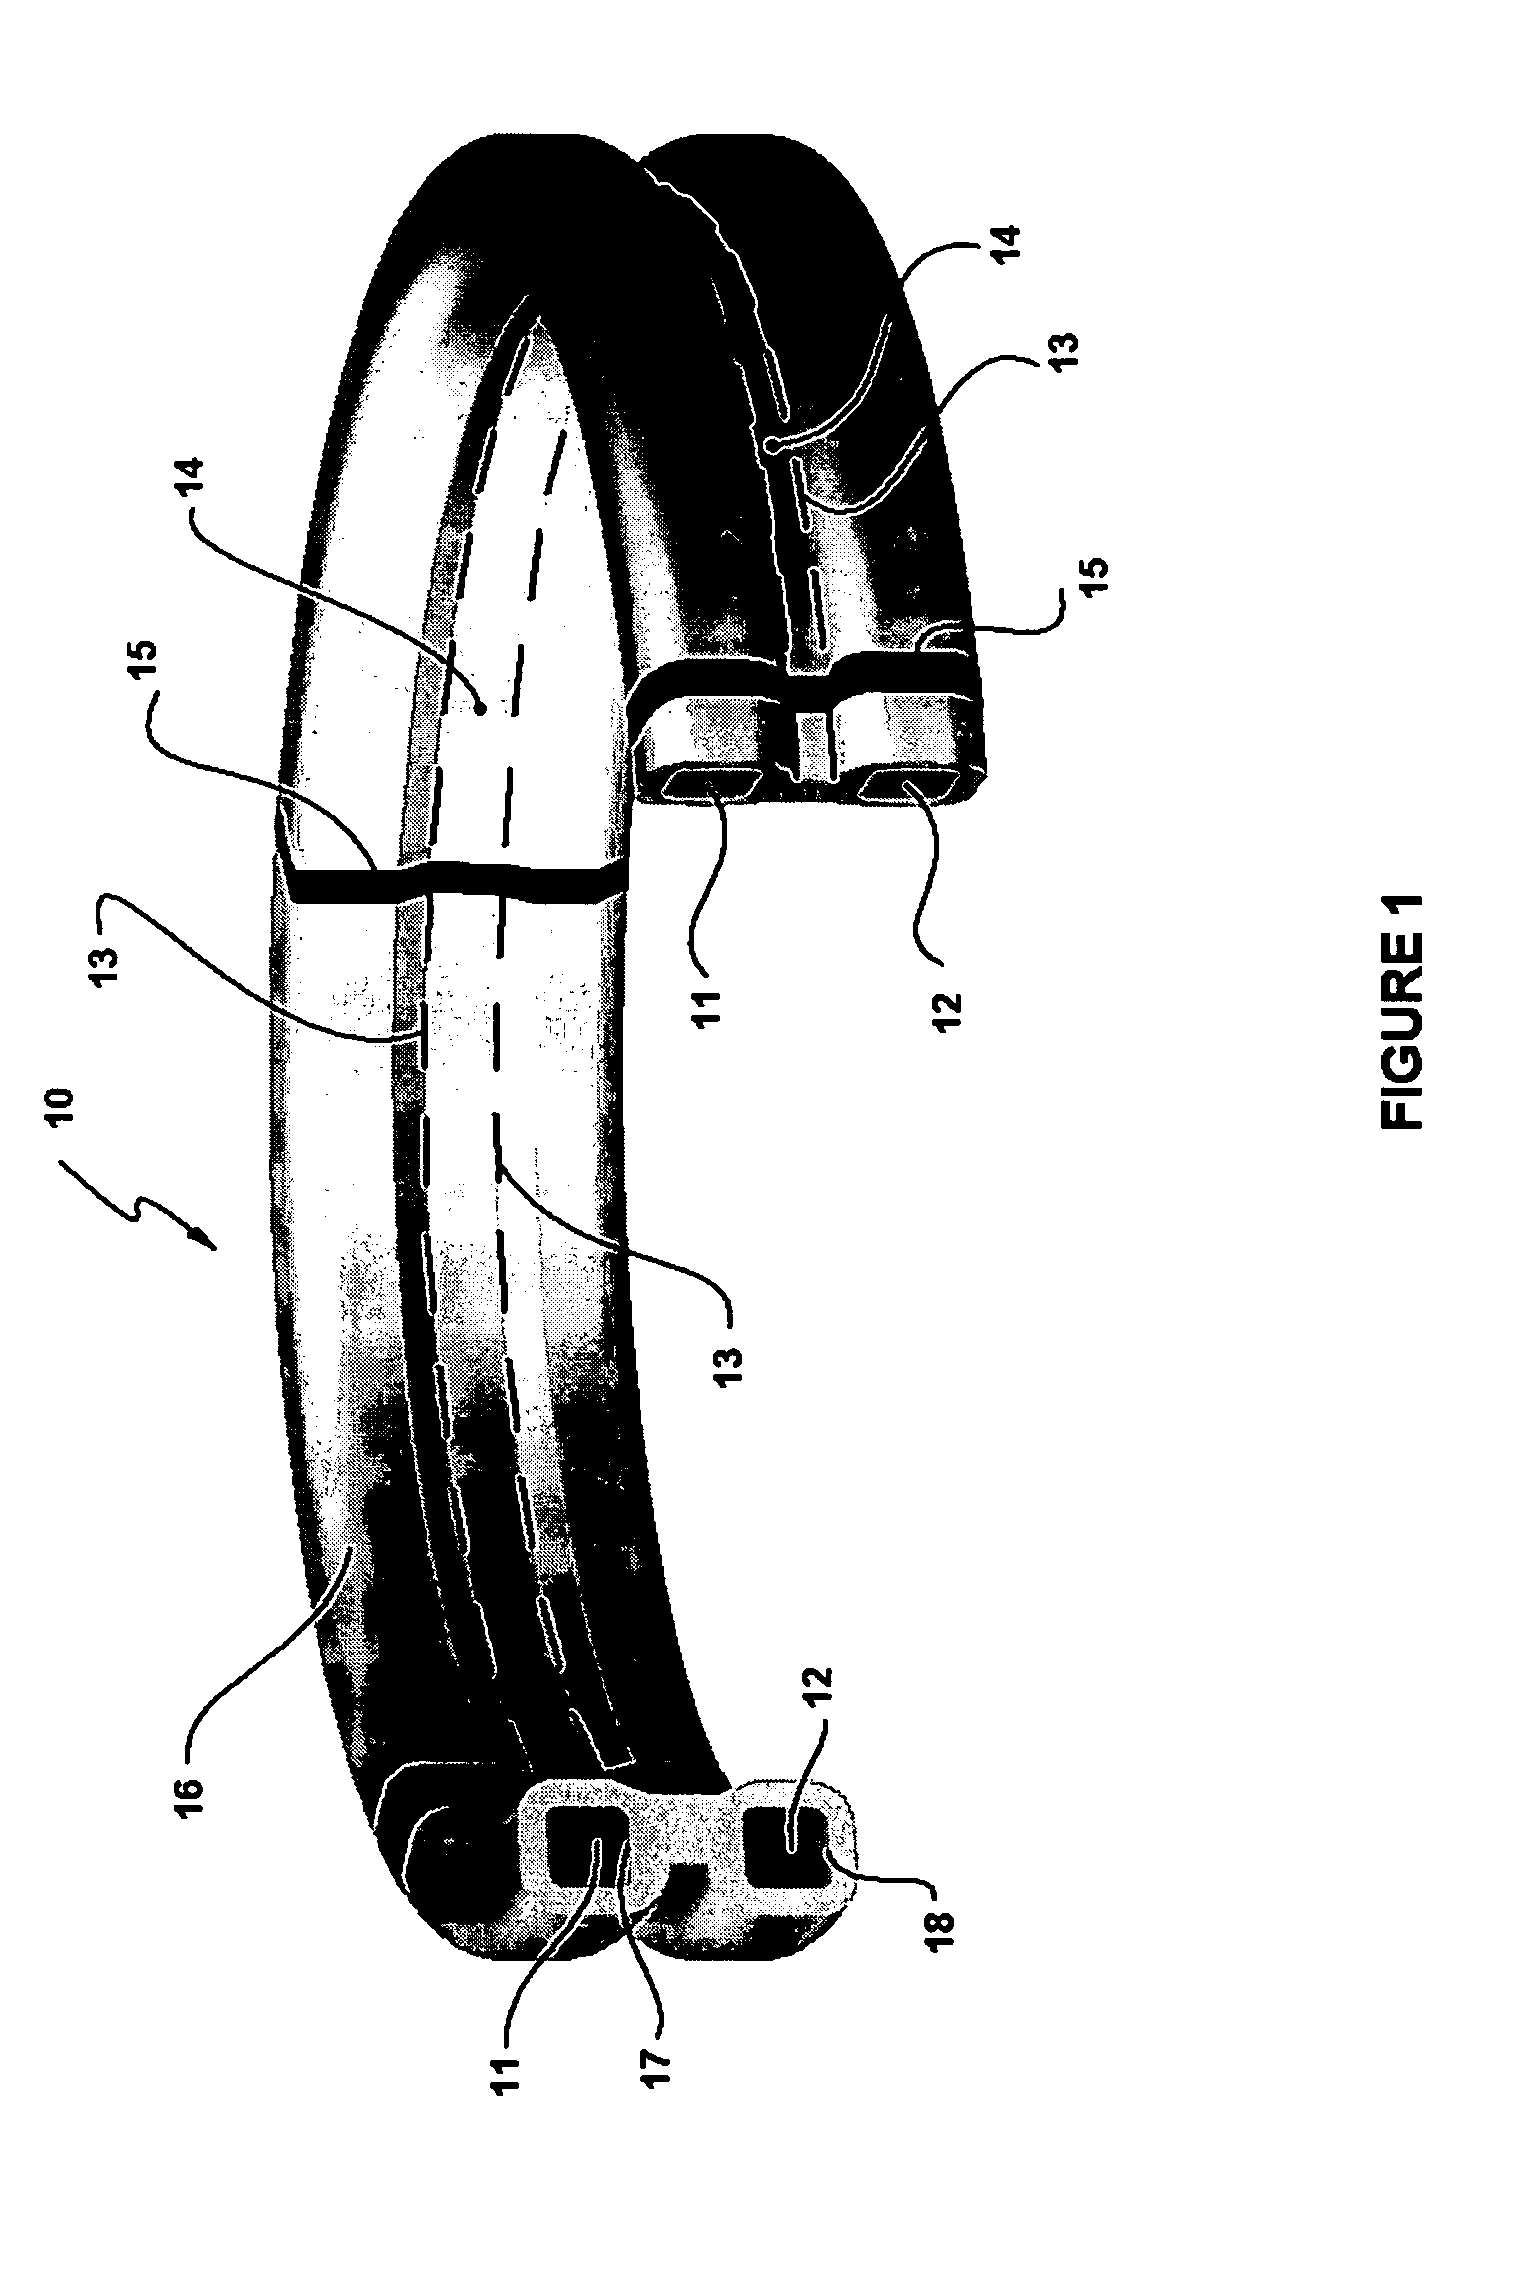 Expandable annuloplasty ring and associated ring holder